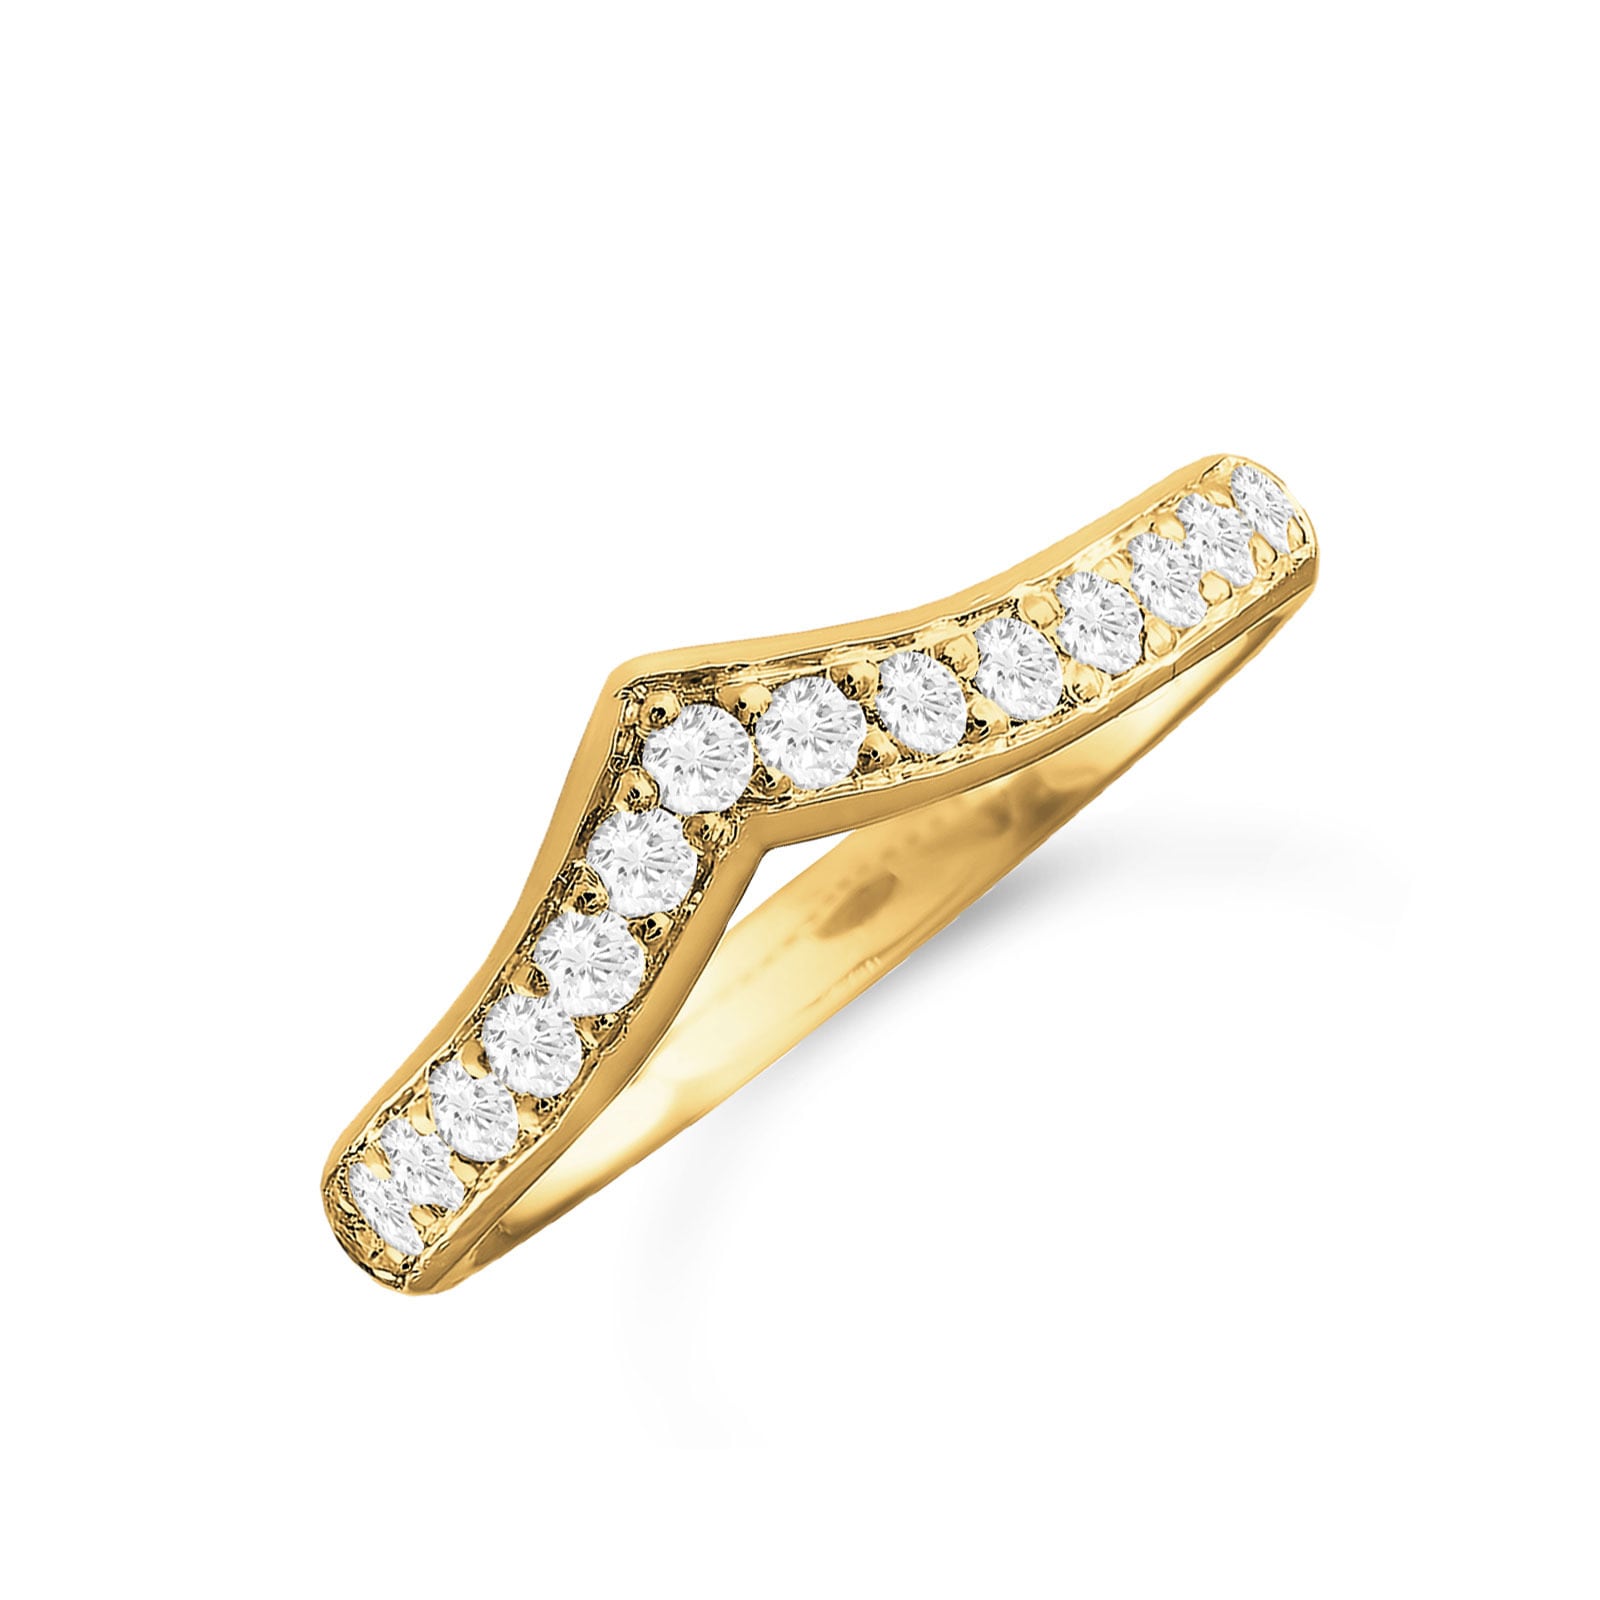 18ct Yellow Gold 0.30cttw Diamond Shaped Wedding Ring - Ring Size L.5